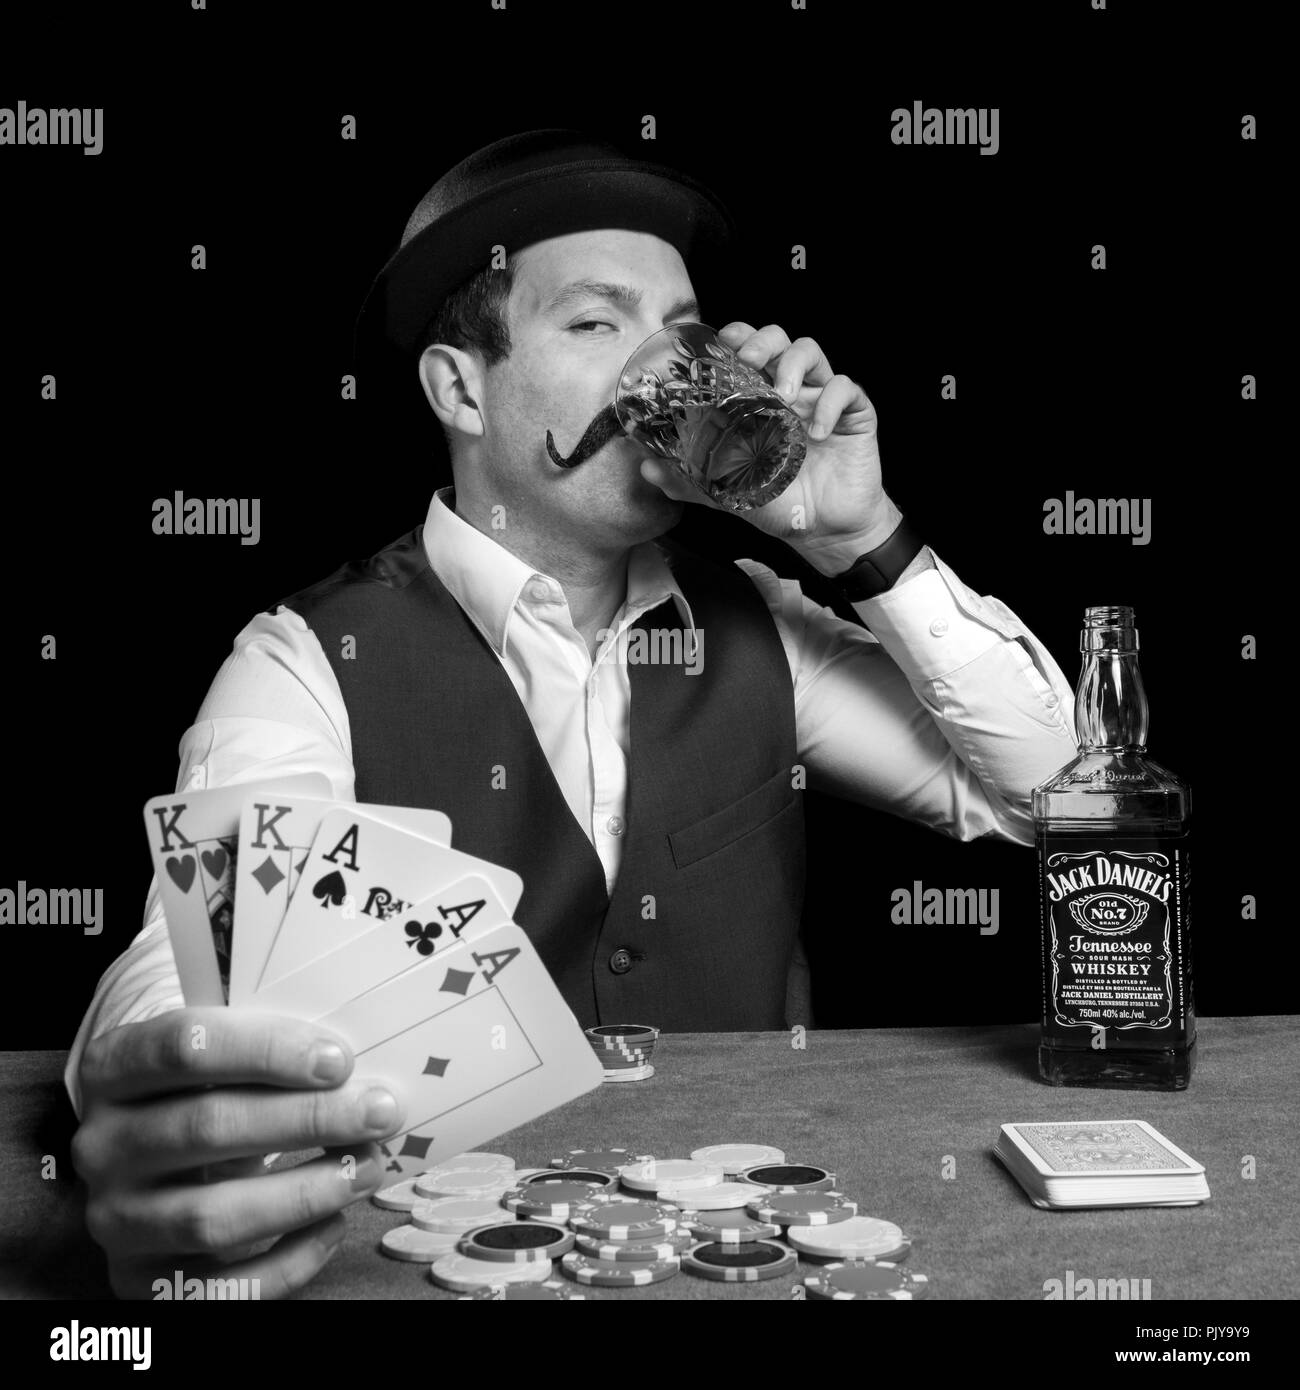 Man with melon hat drinking alcohol and winning a game of poker jack  daniel's playing cards game funny fake vintage photography Stock Photo -  Alamy